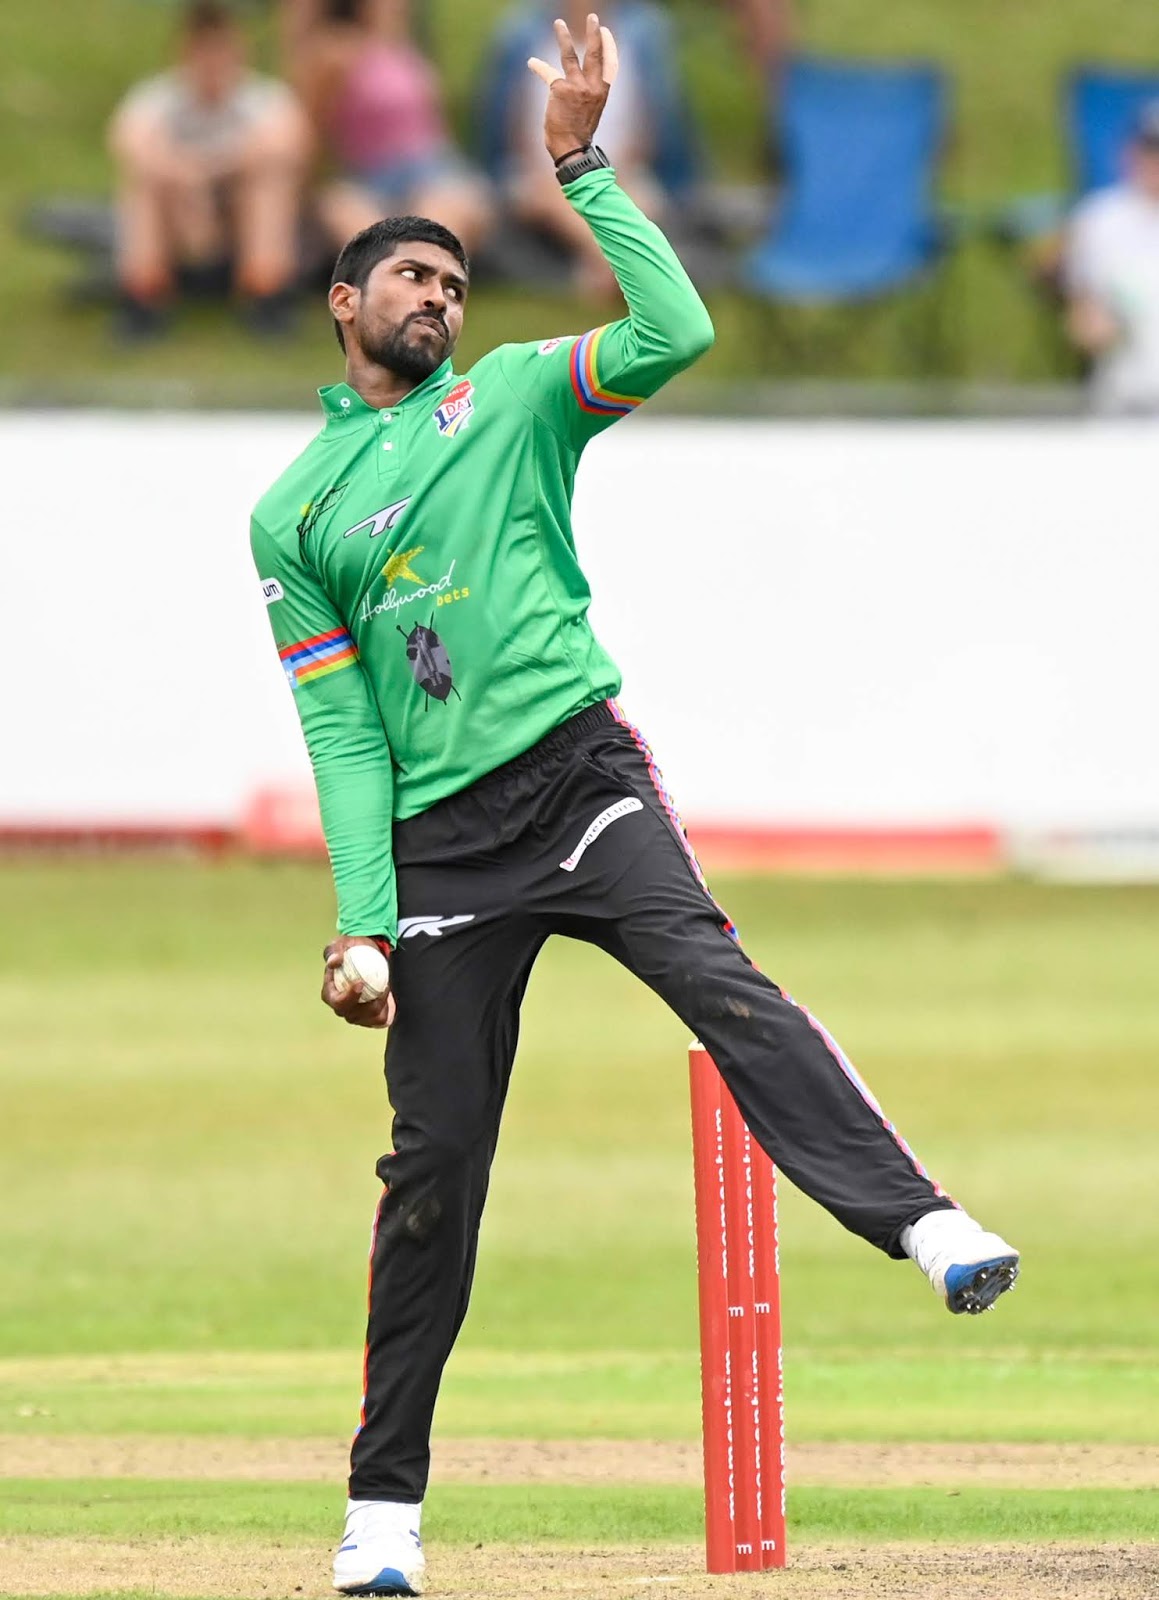 Subrayen takes over Dolphins MODC captaincy